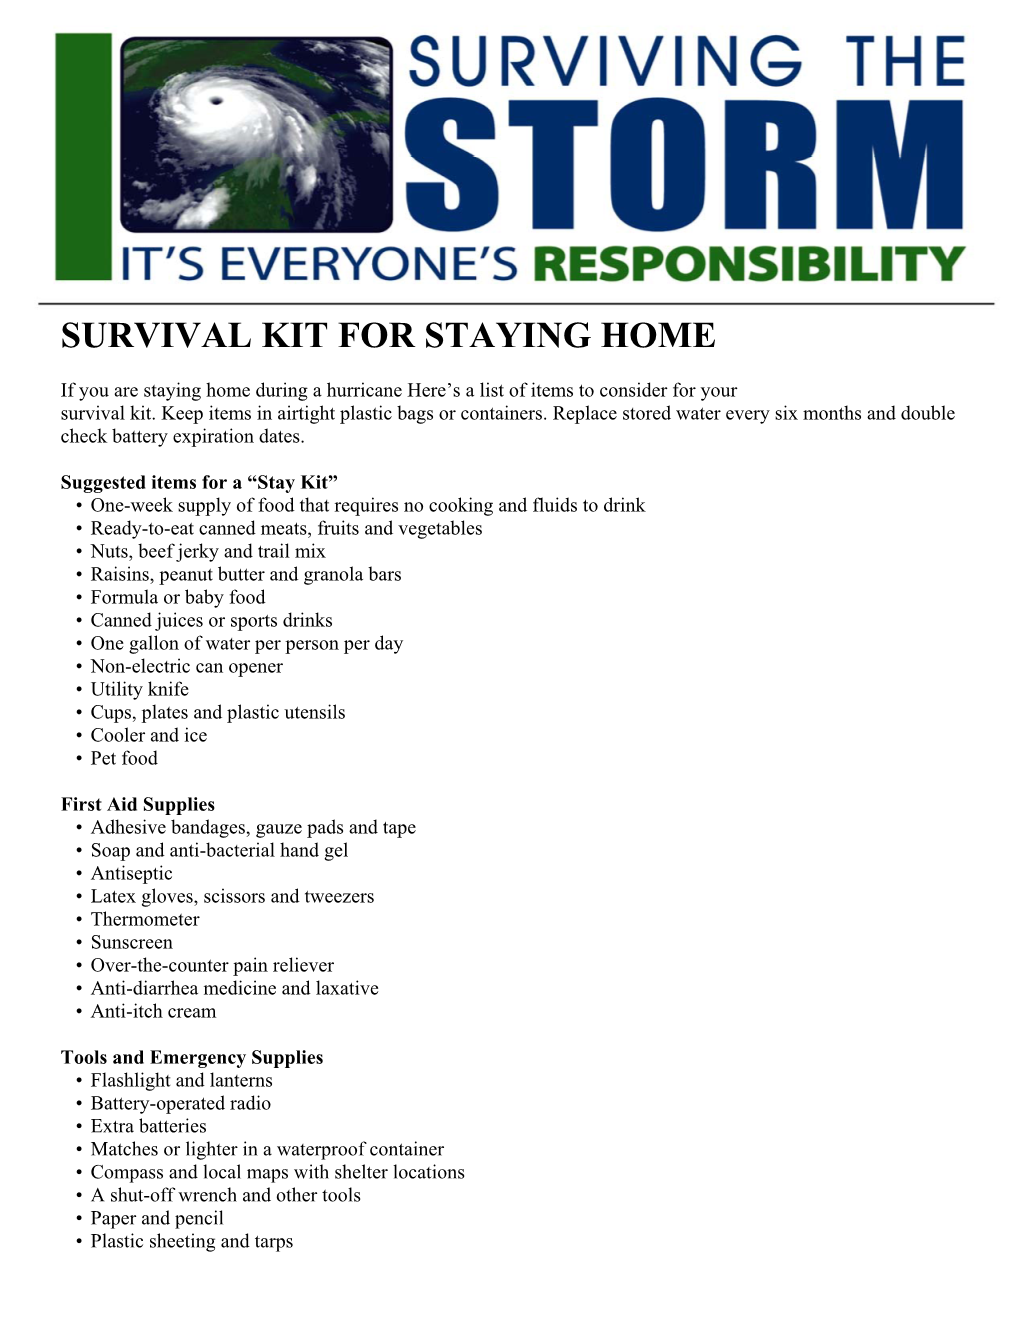 Survival Kit for Staying Home